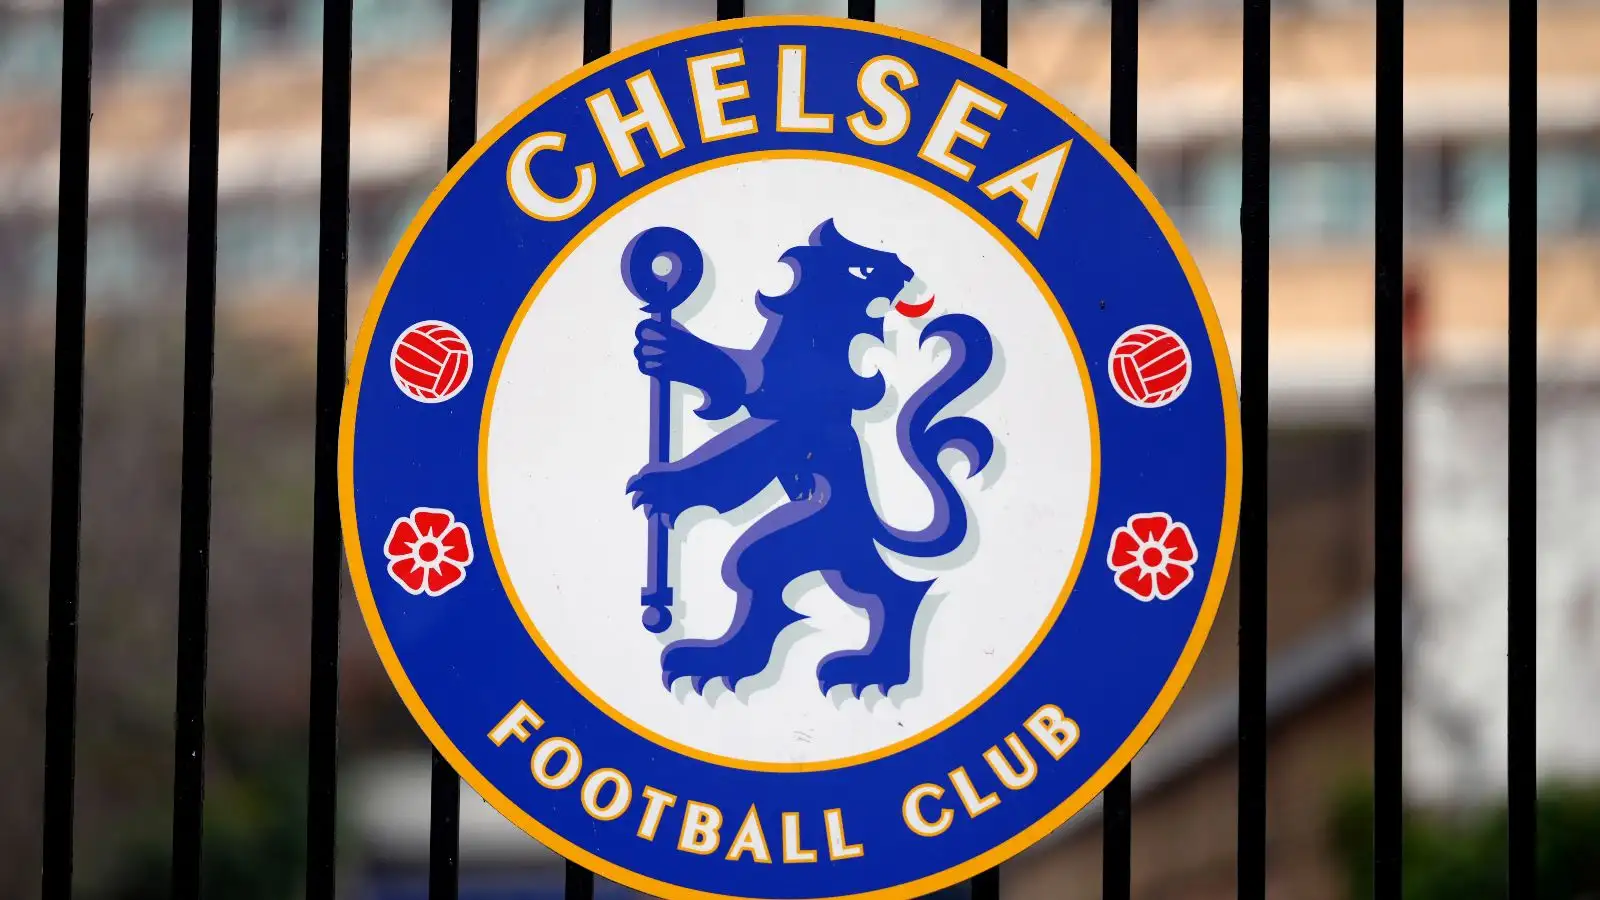 Chelsea due to be sold